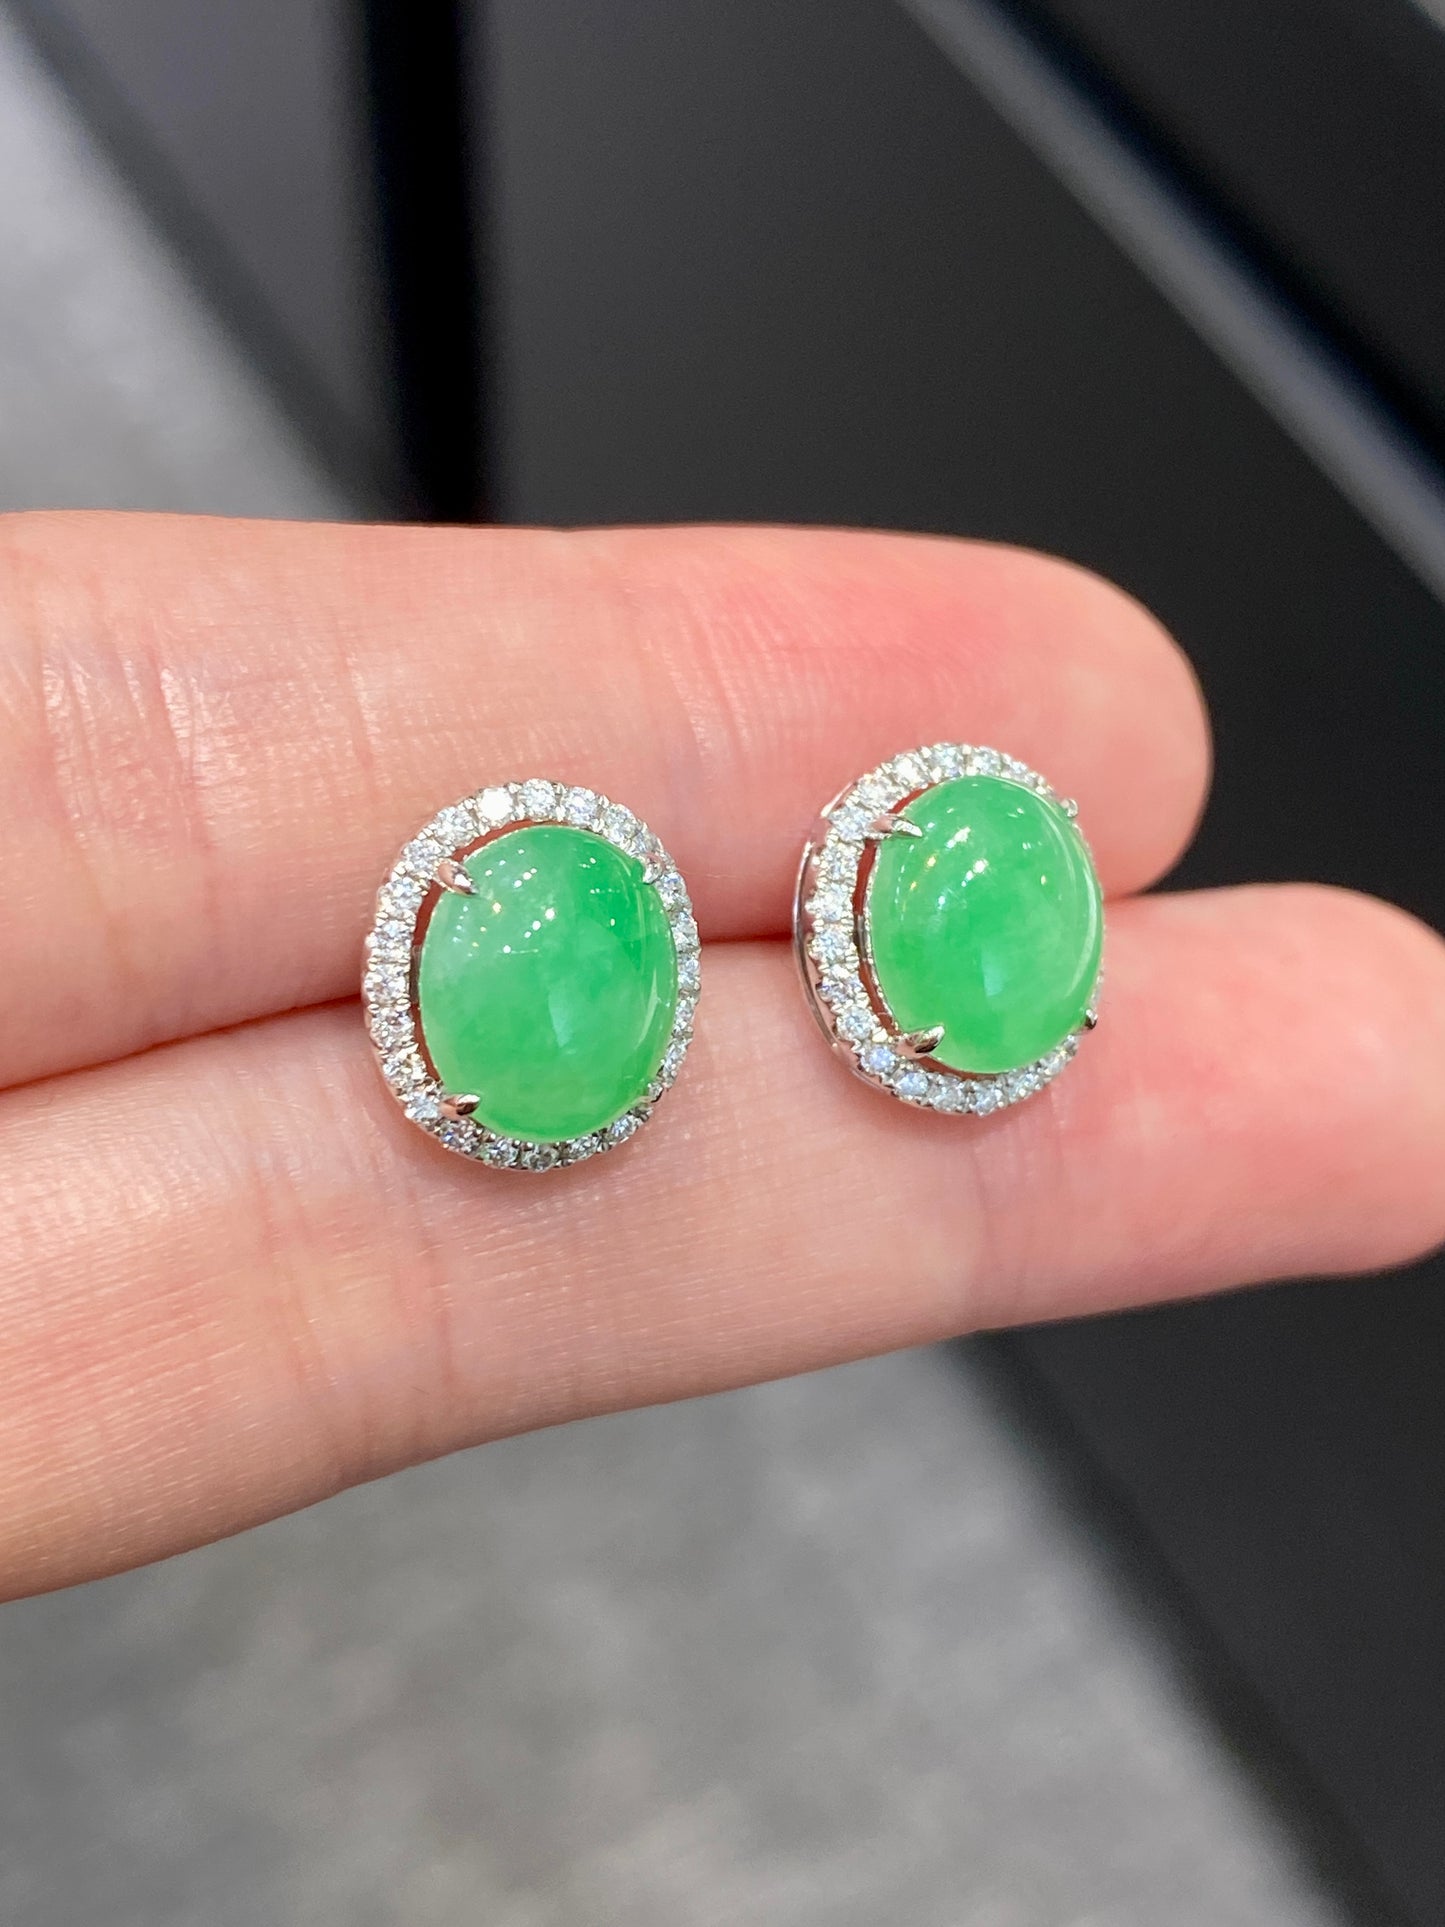 Natural Type A Jadeite Earrings set with 0.34ct Natural Diamonds In 18K White Gold Singapore Gemstone Fine Jewellery